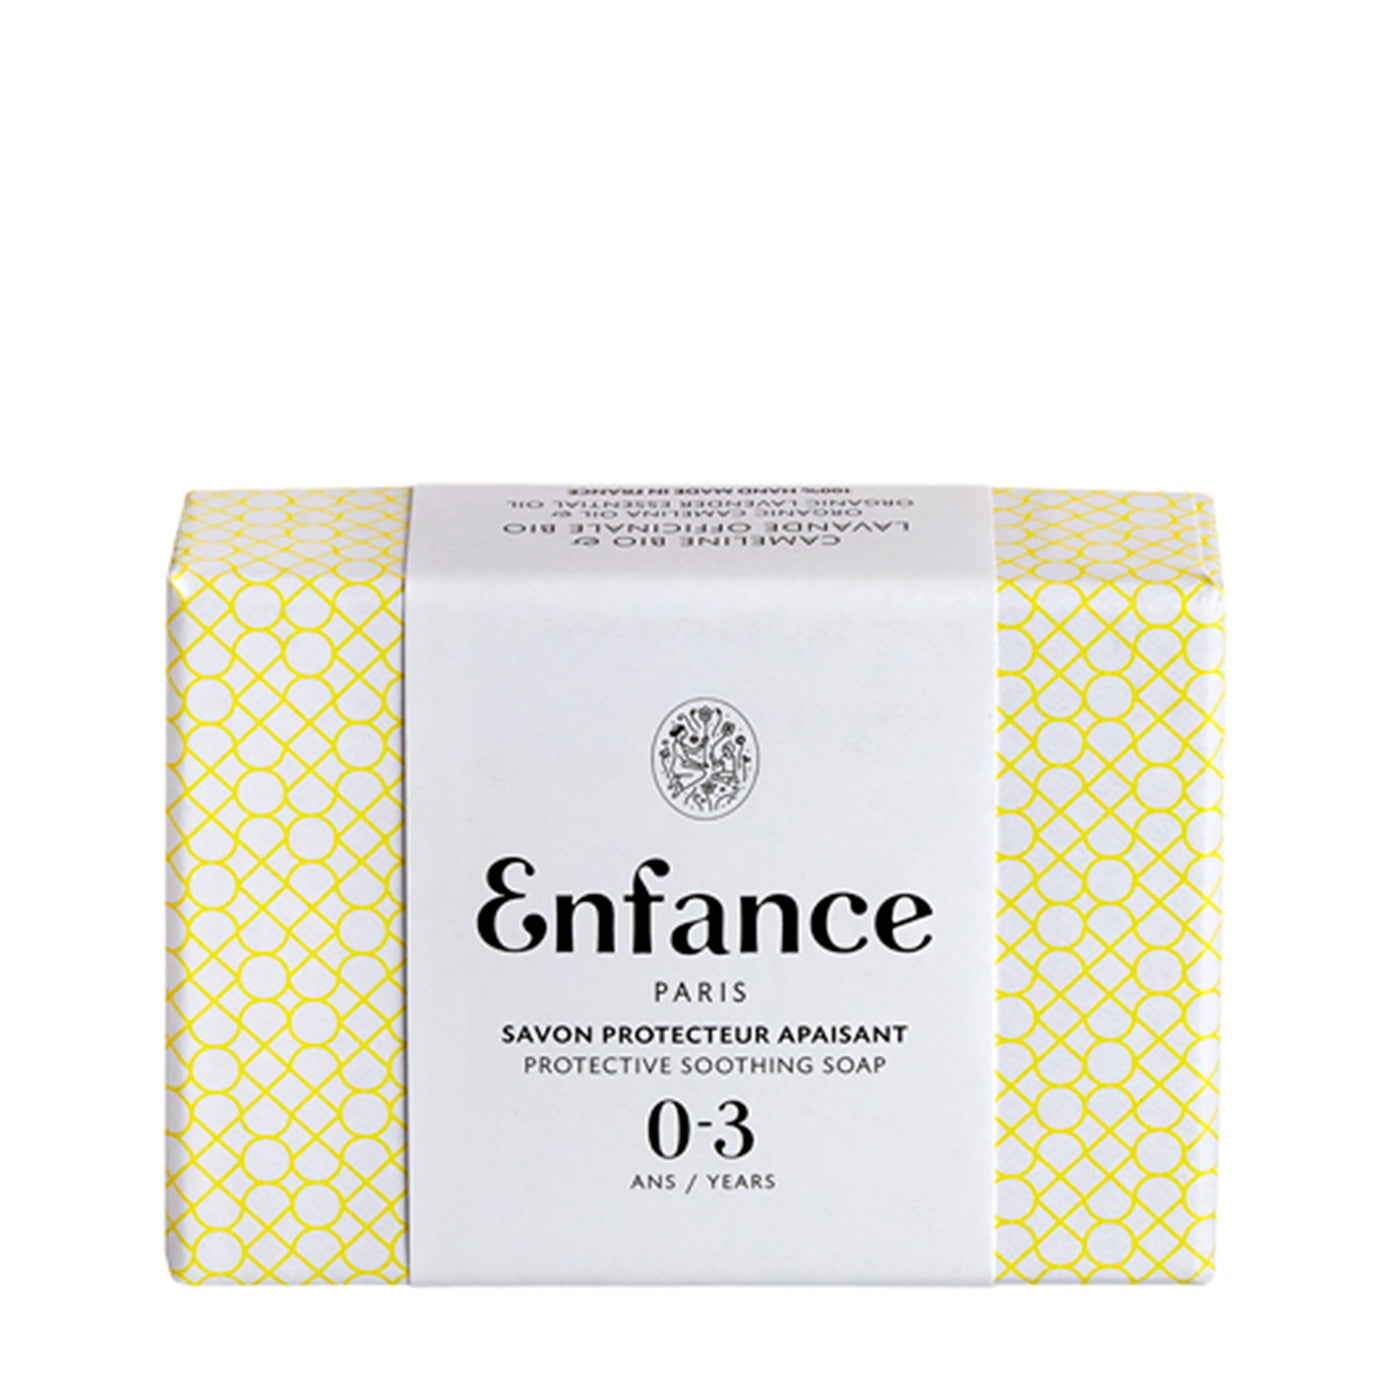 Enfance Paris Protective Soothing Soap 0-3 Years